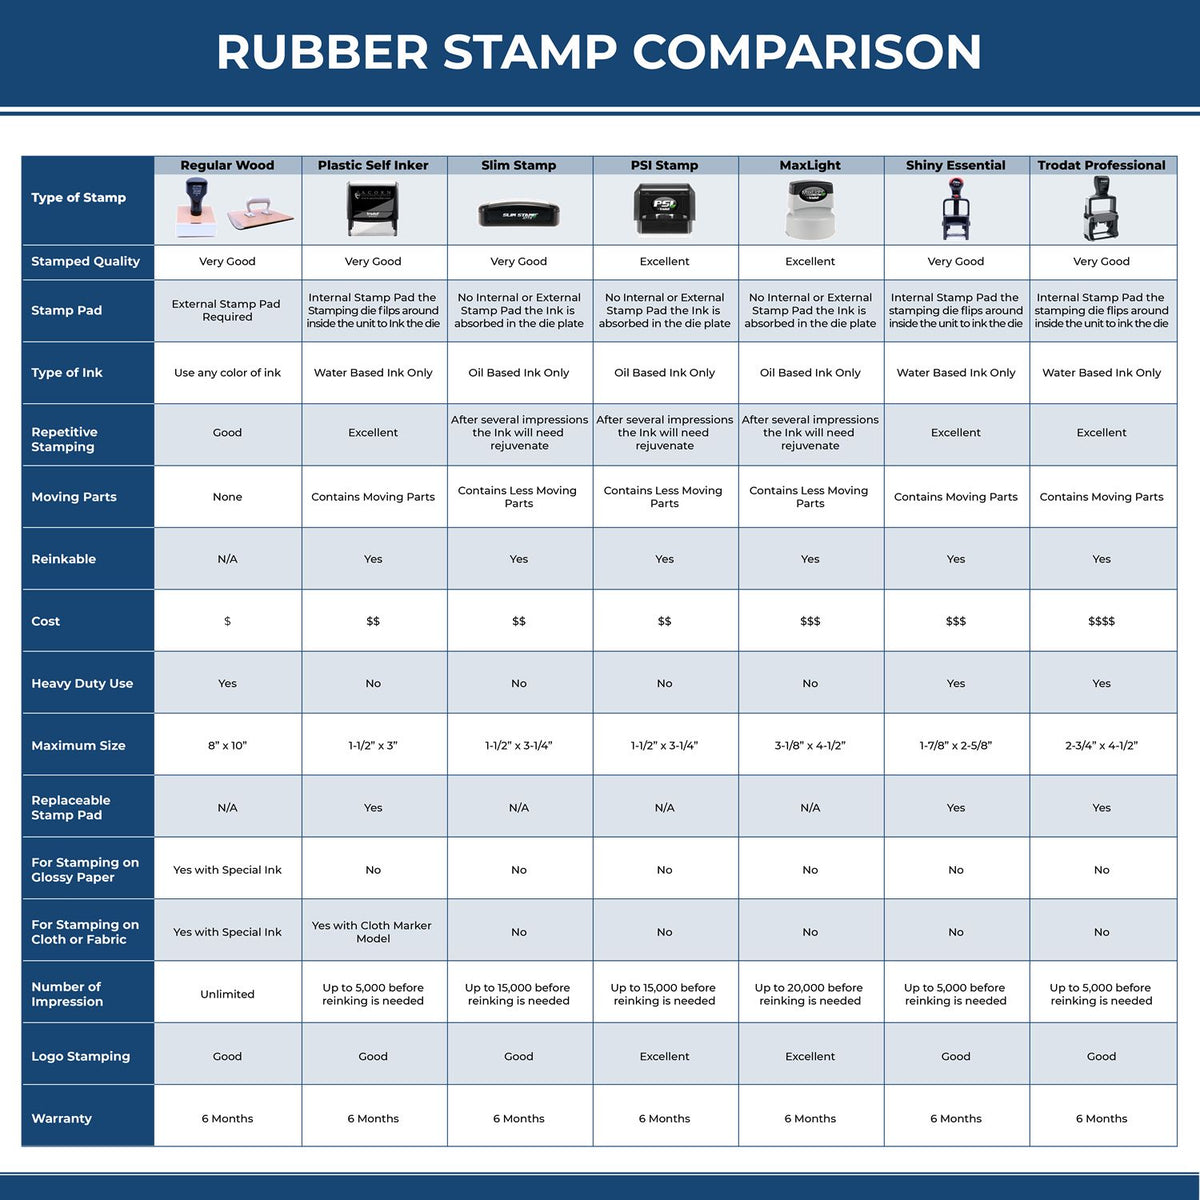 Large Self-Inking Brilliant Stamp 5595S Rubber Stamp Comparison